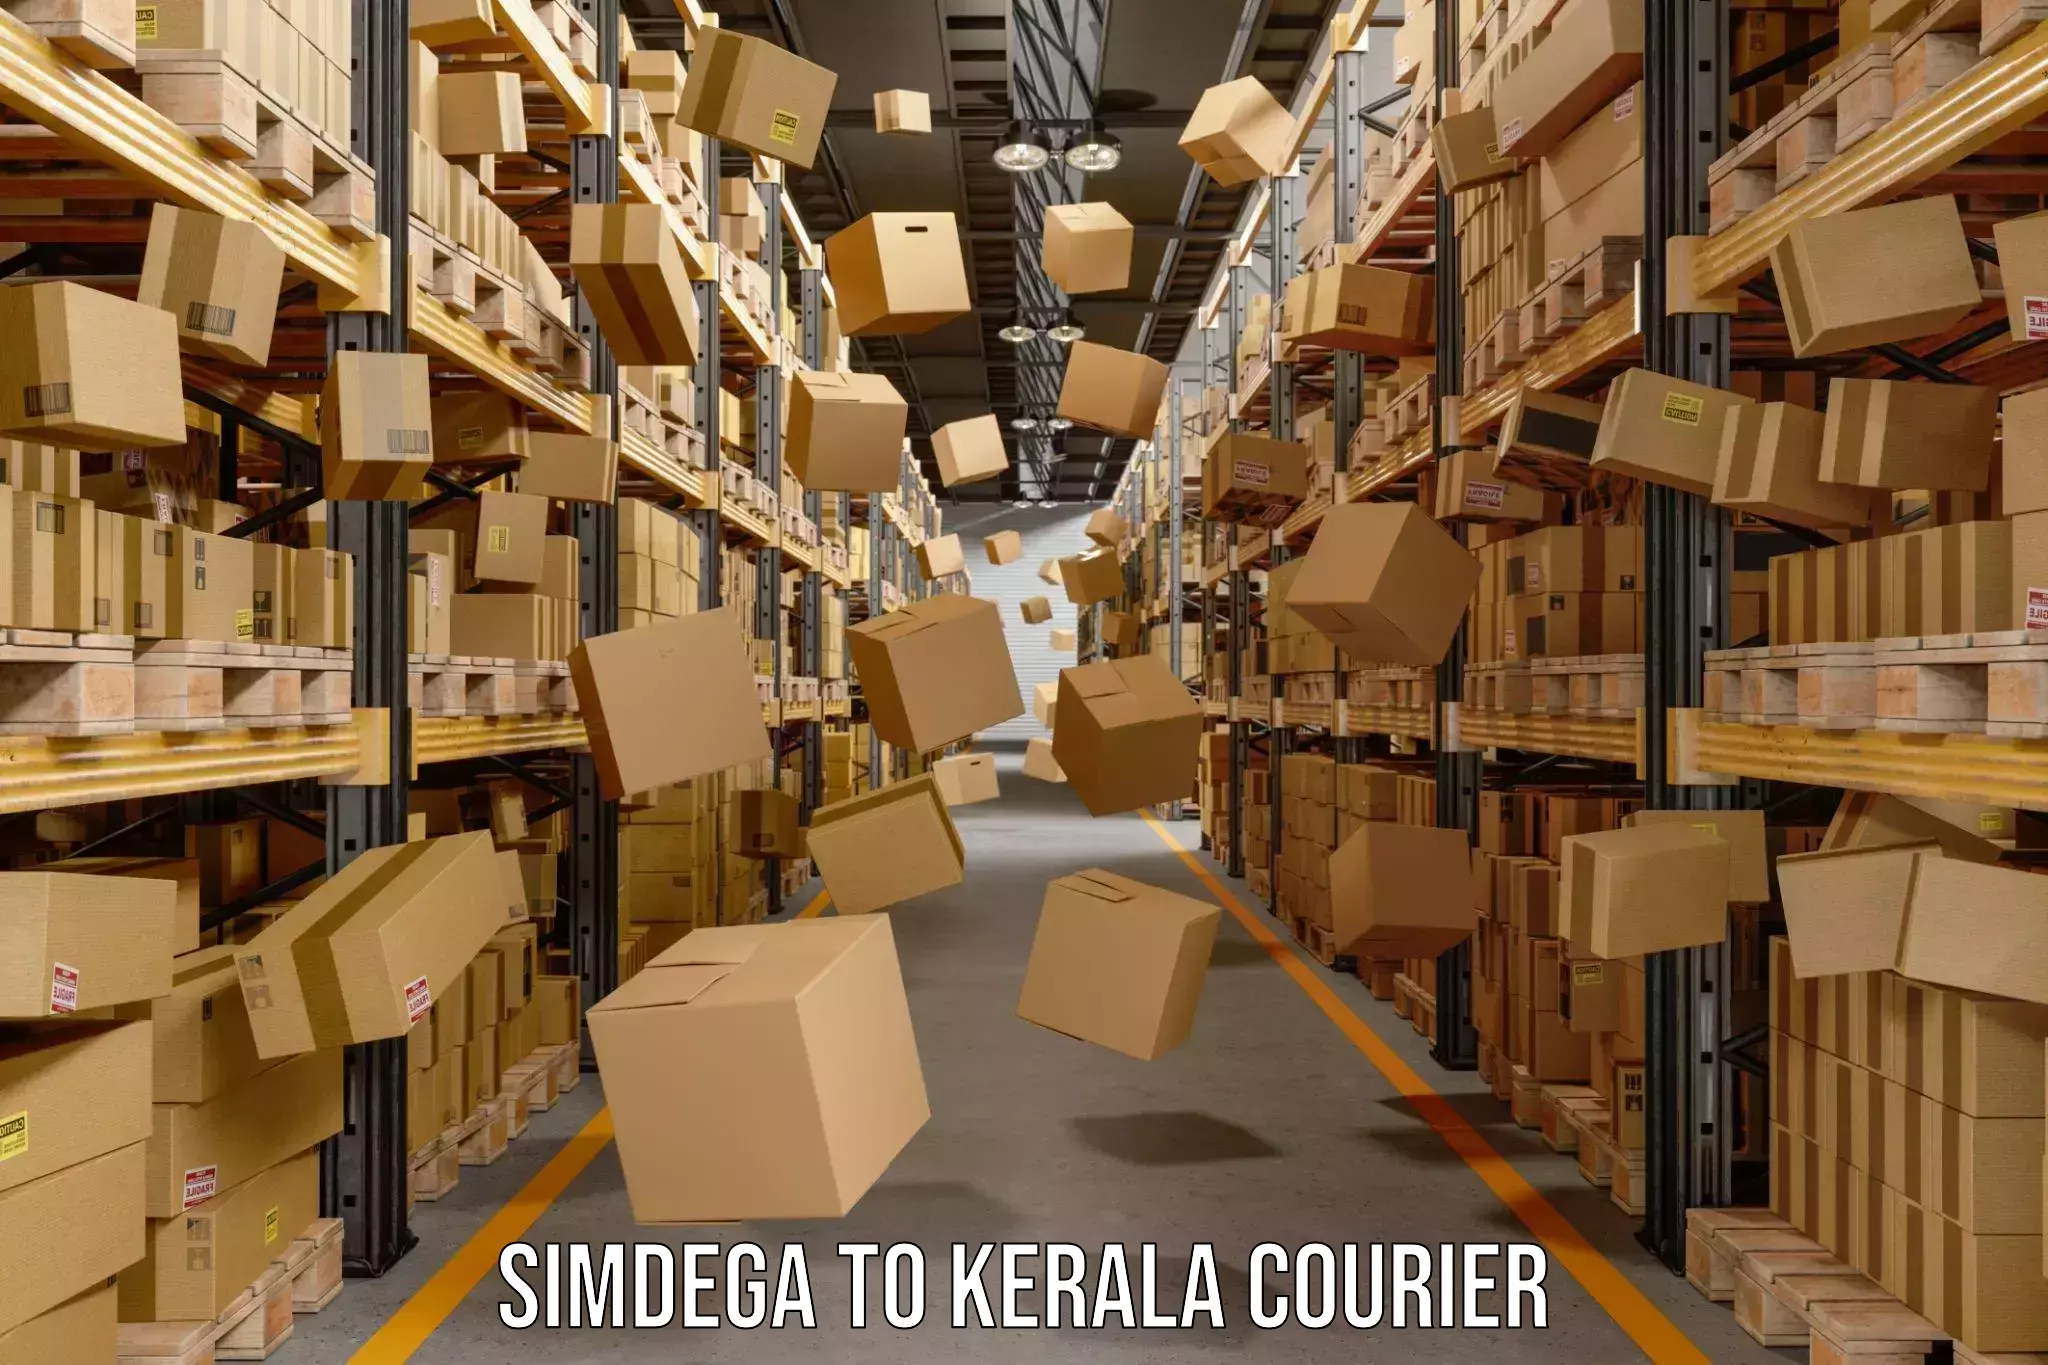 Round-the-clock parcel delivery Simdega to Kerala